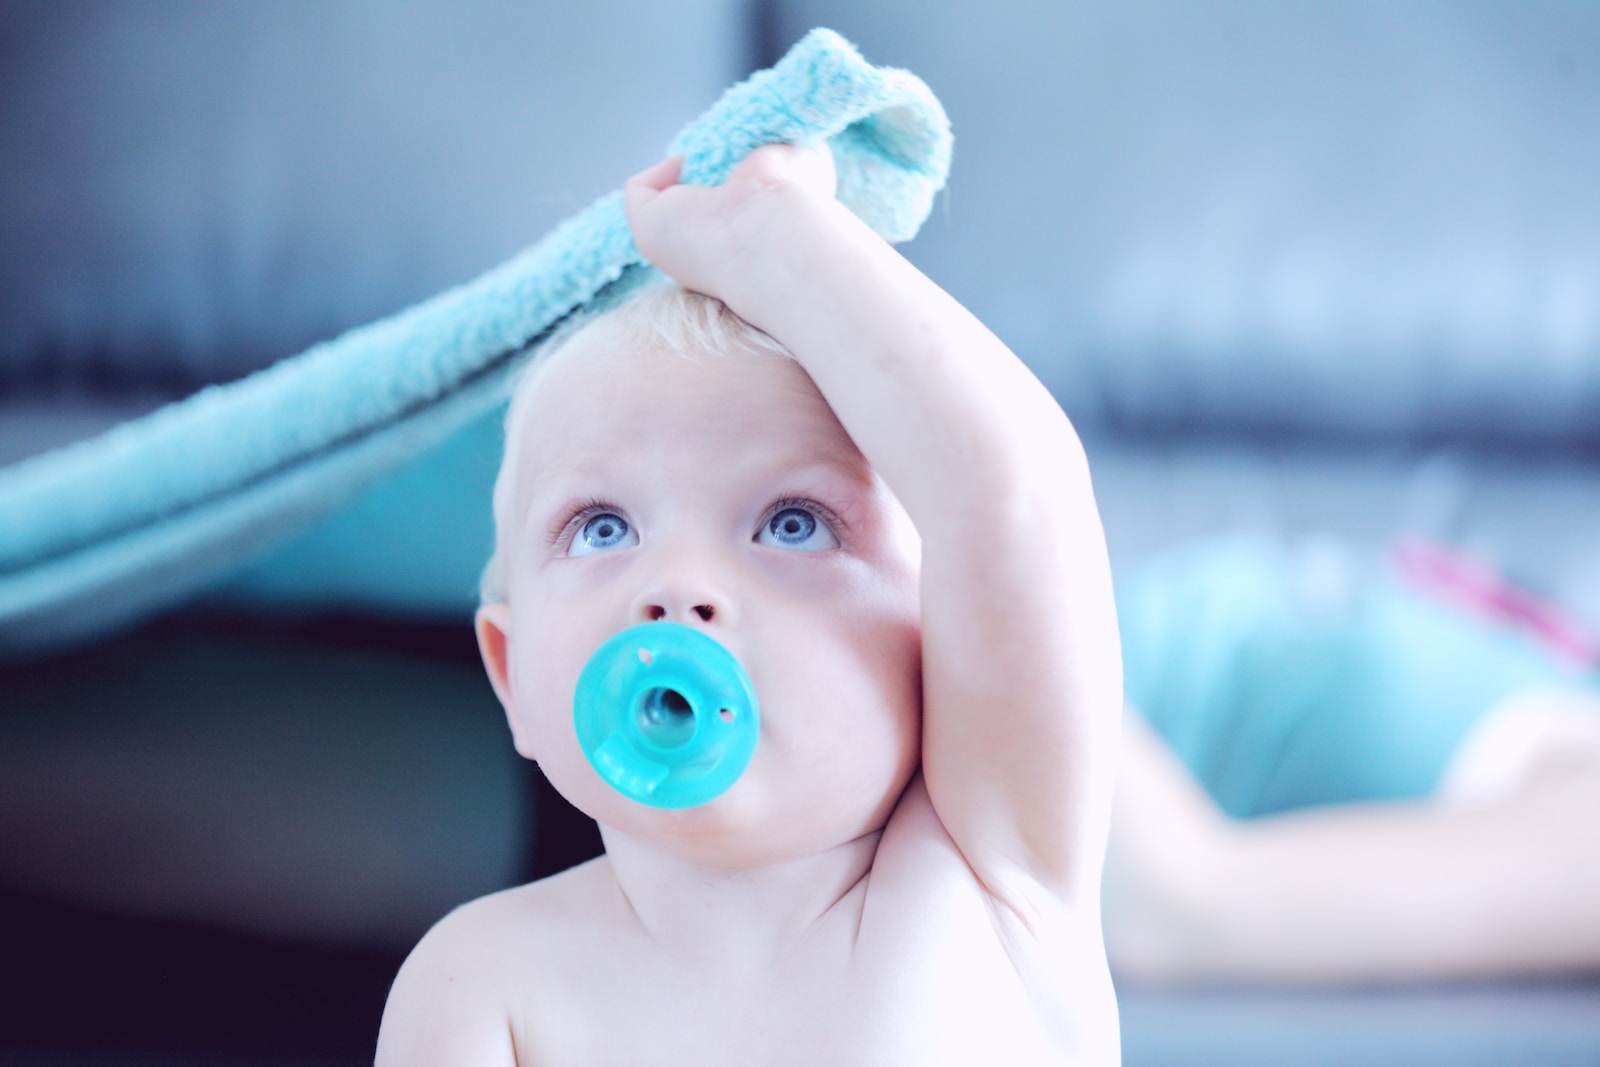 How to Clean a Pacifier